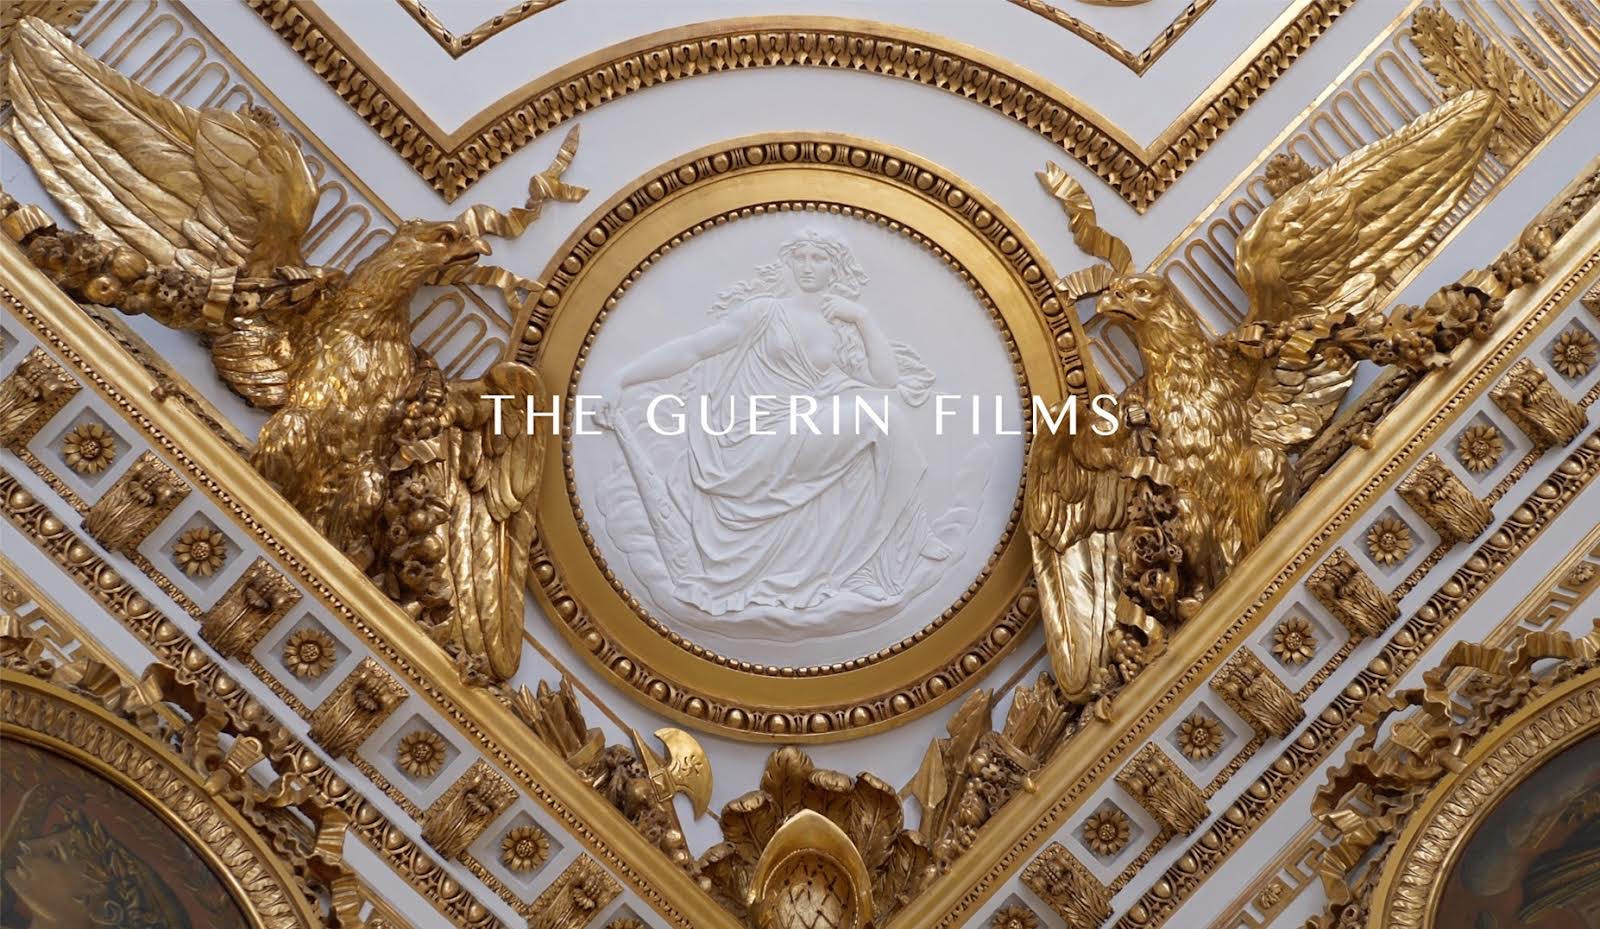 The Guerin Films